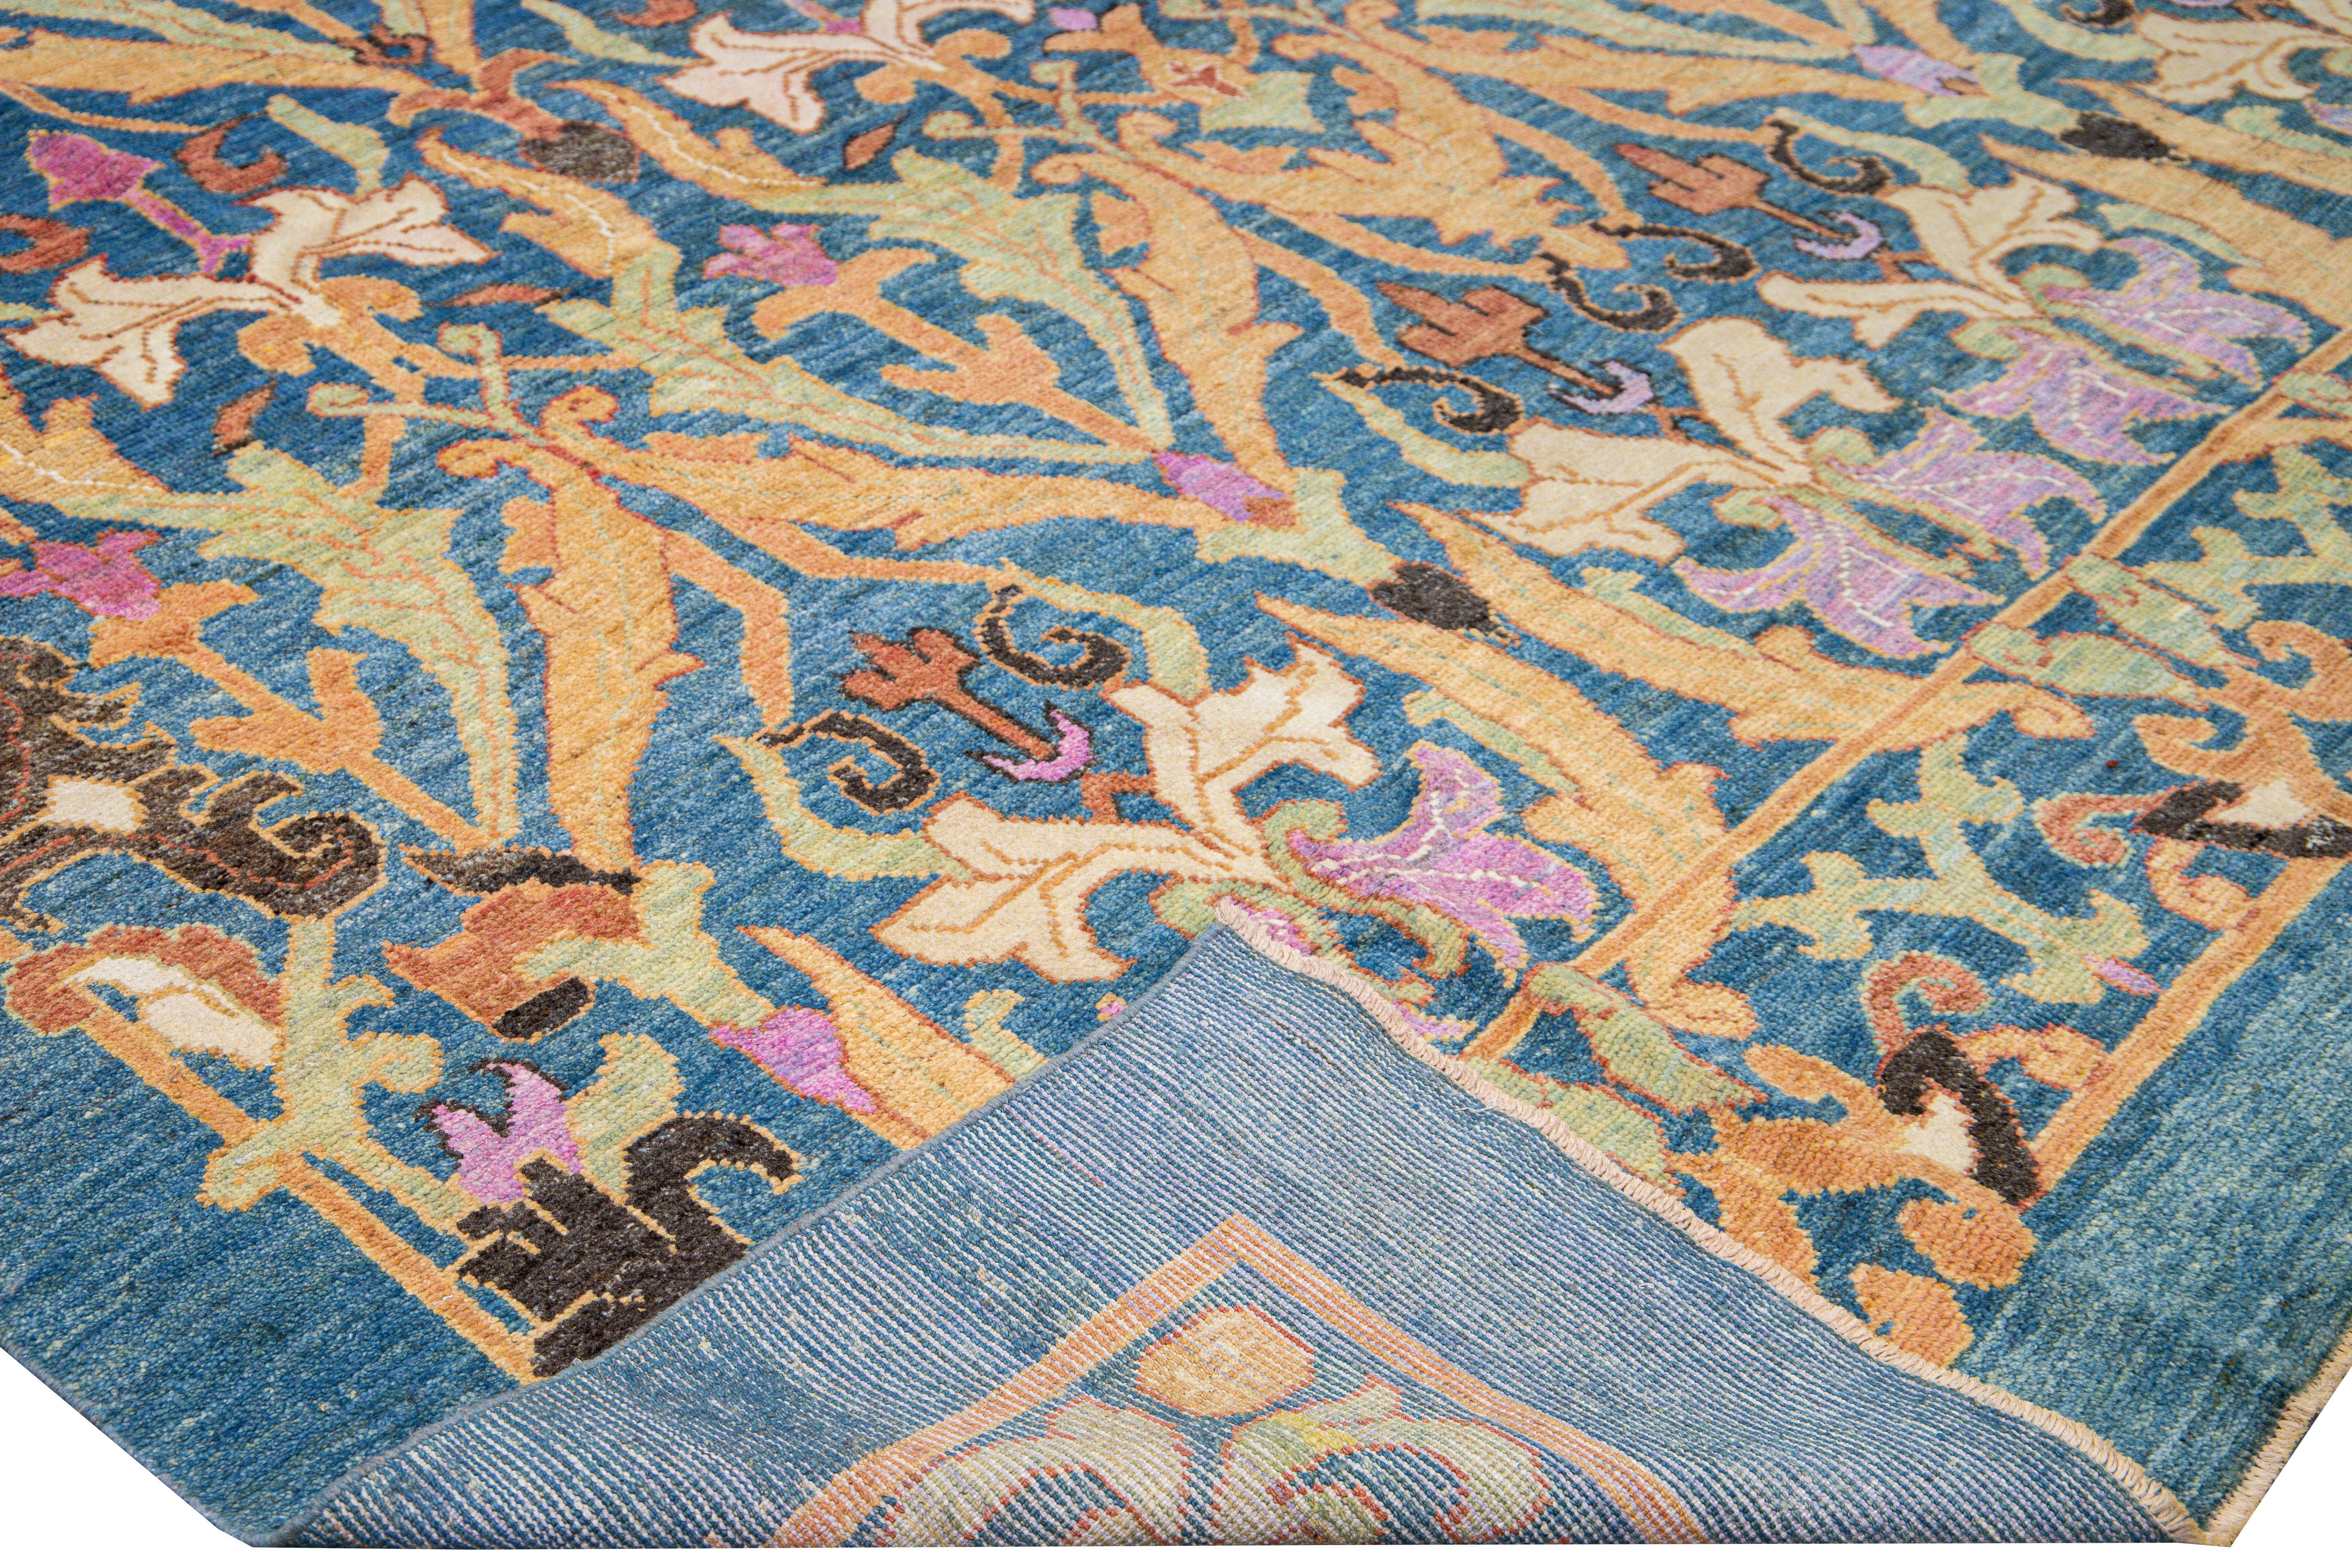 Beautiful modern Oushak hand-knotted wool rug with a blue field. This Oushak rug has orange, green, beige, pink, purple, and brown accents in a gorgeous floral pattern design. 

This rug measures: 13'9